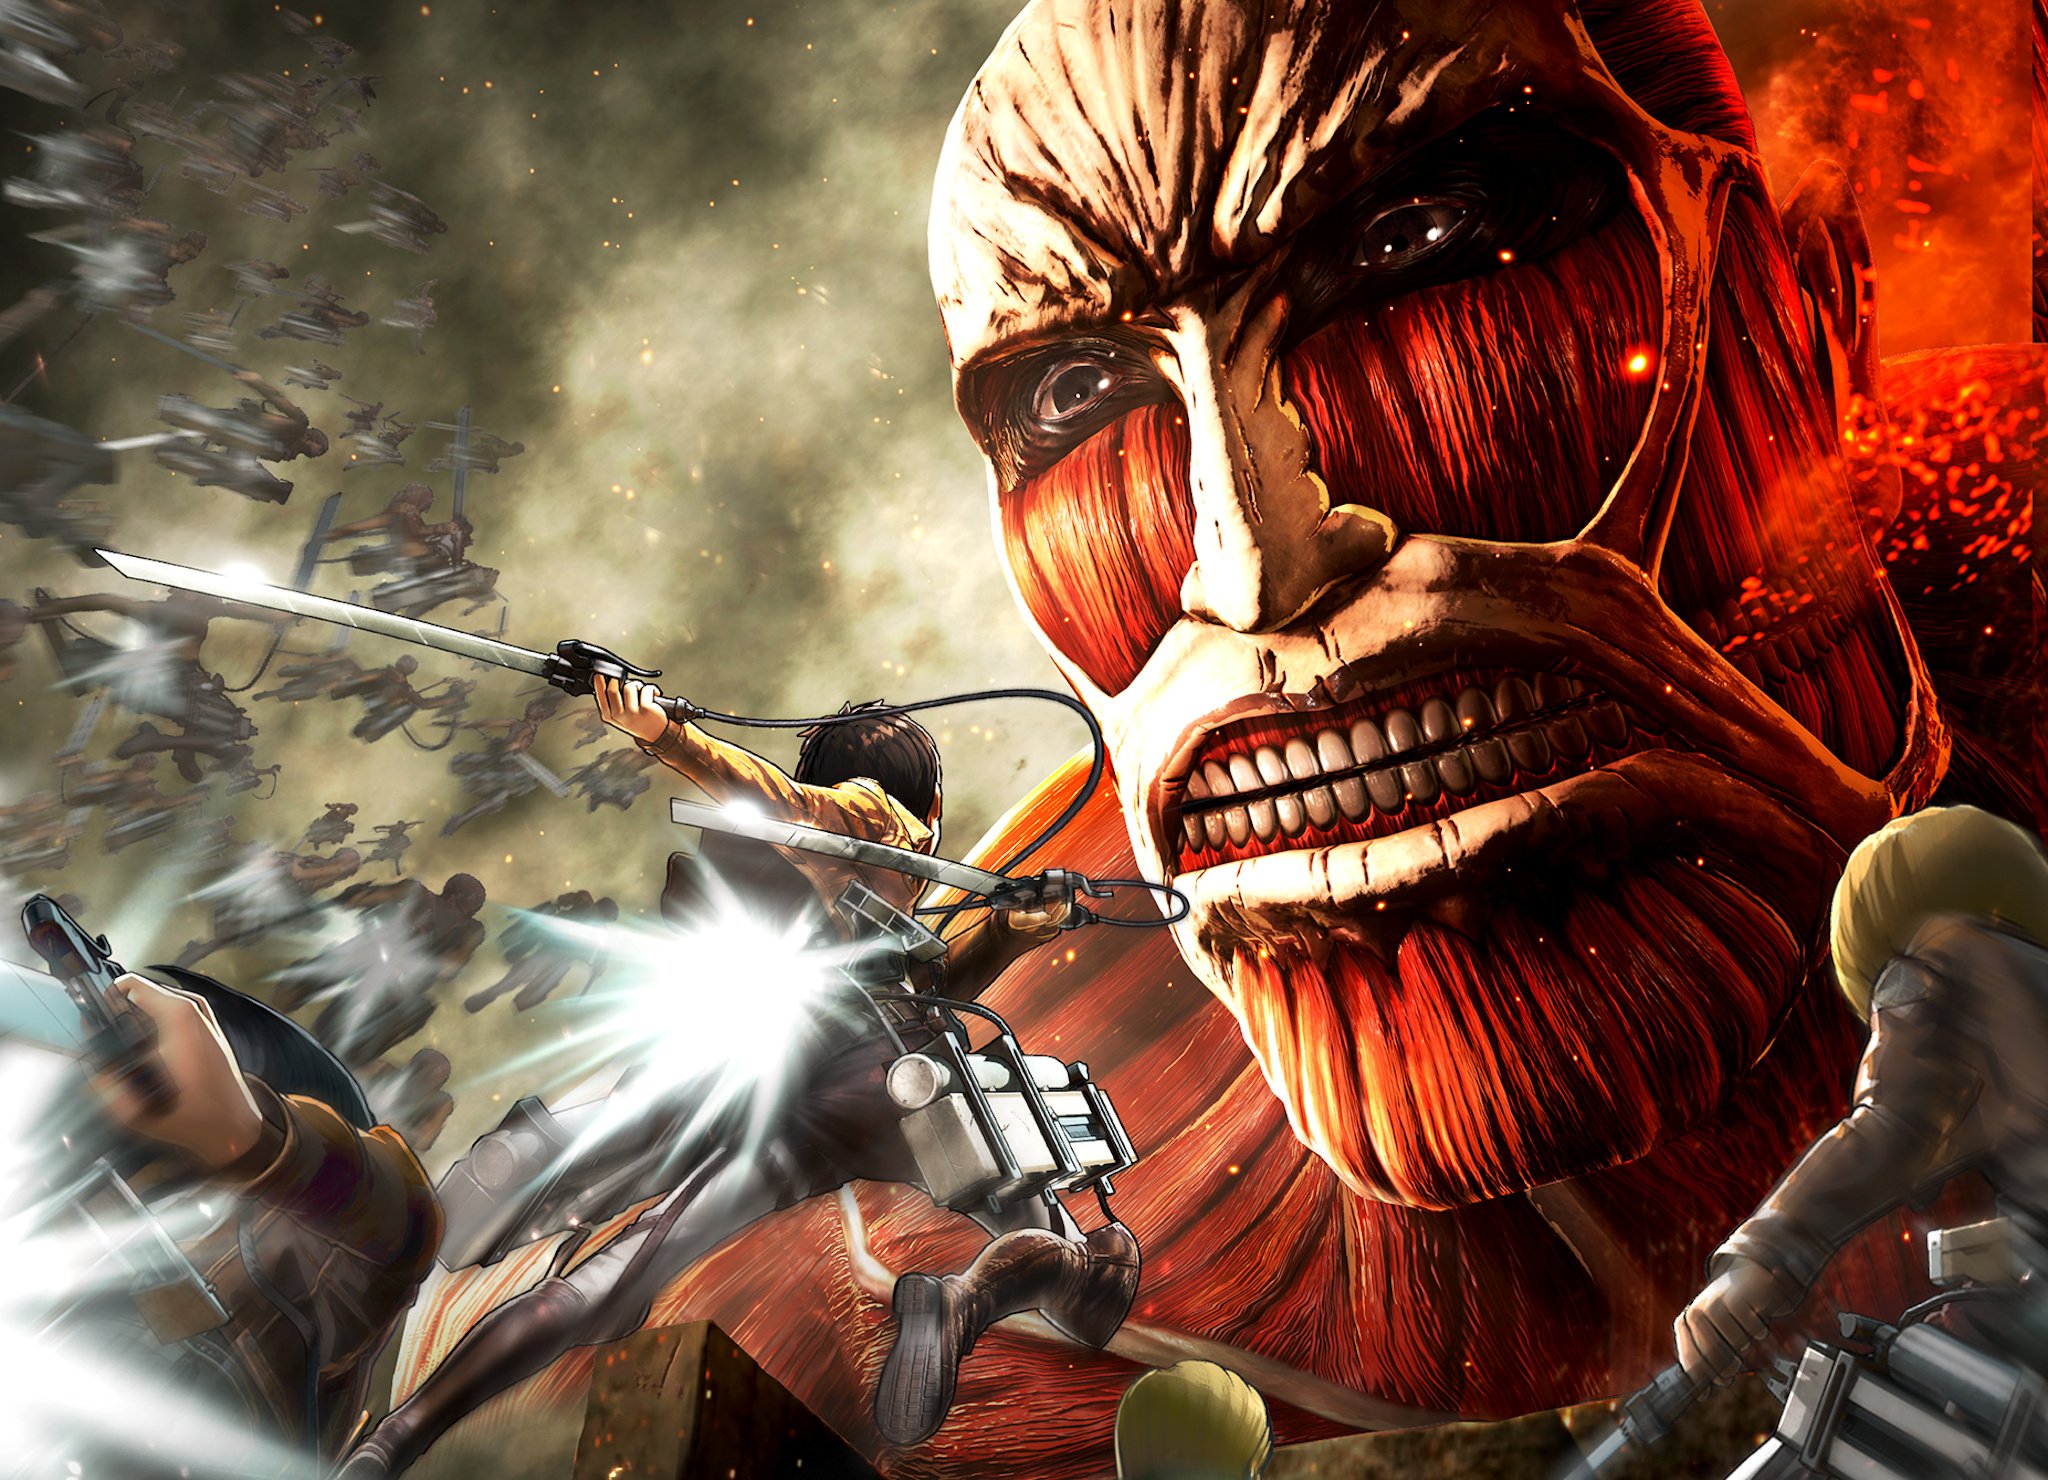 Attack-on-Titan-videogame-preview-main.jpg